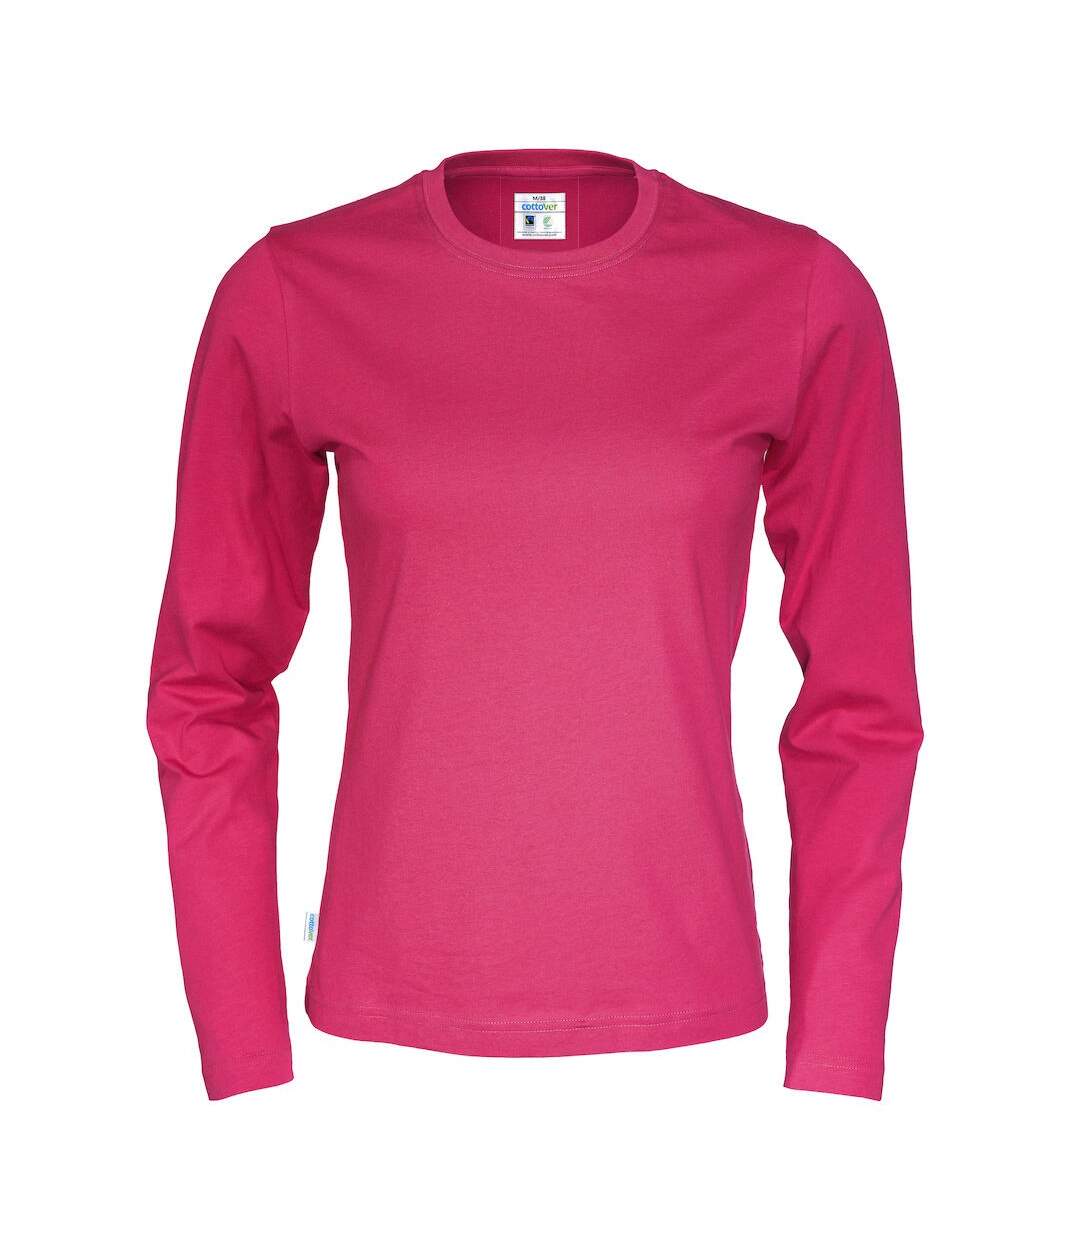 Cottover Womens/Ladies Long-Sleeved T-Shirt (Dark Cerise)